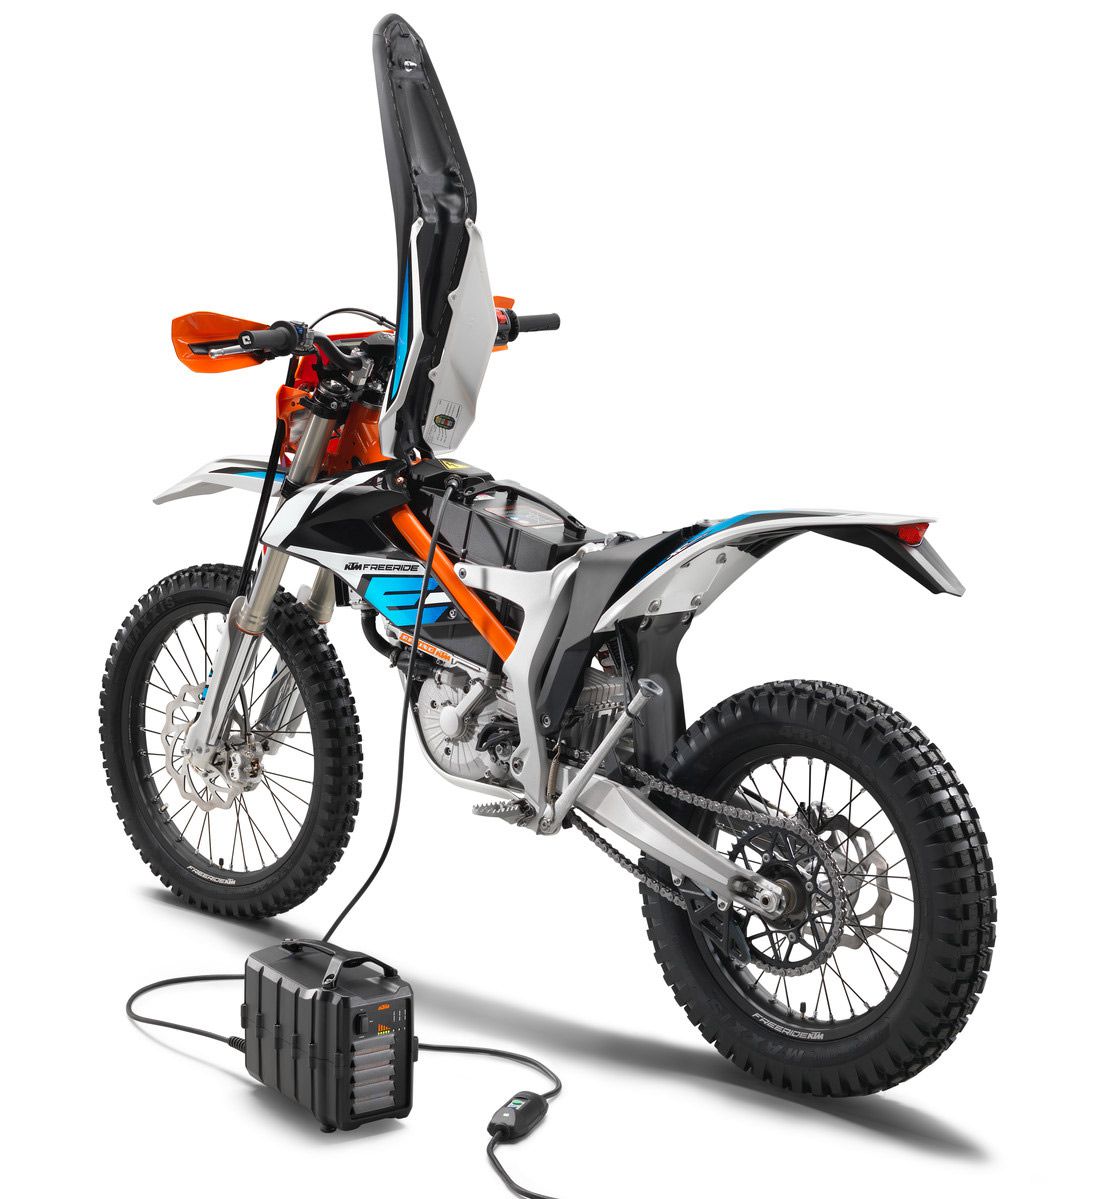 The quick-change KTM PowerPack with 3.9 kWh capacity in “action.”